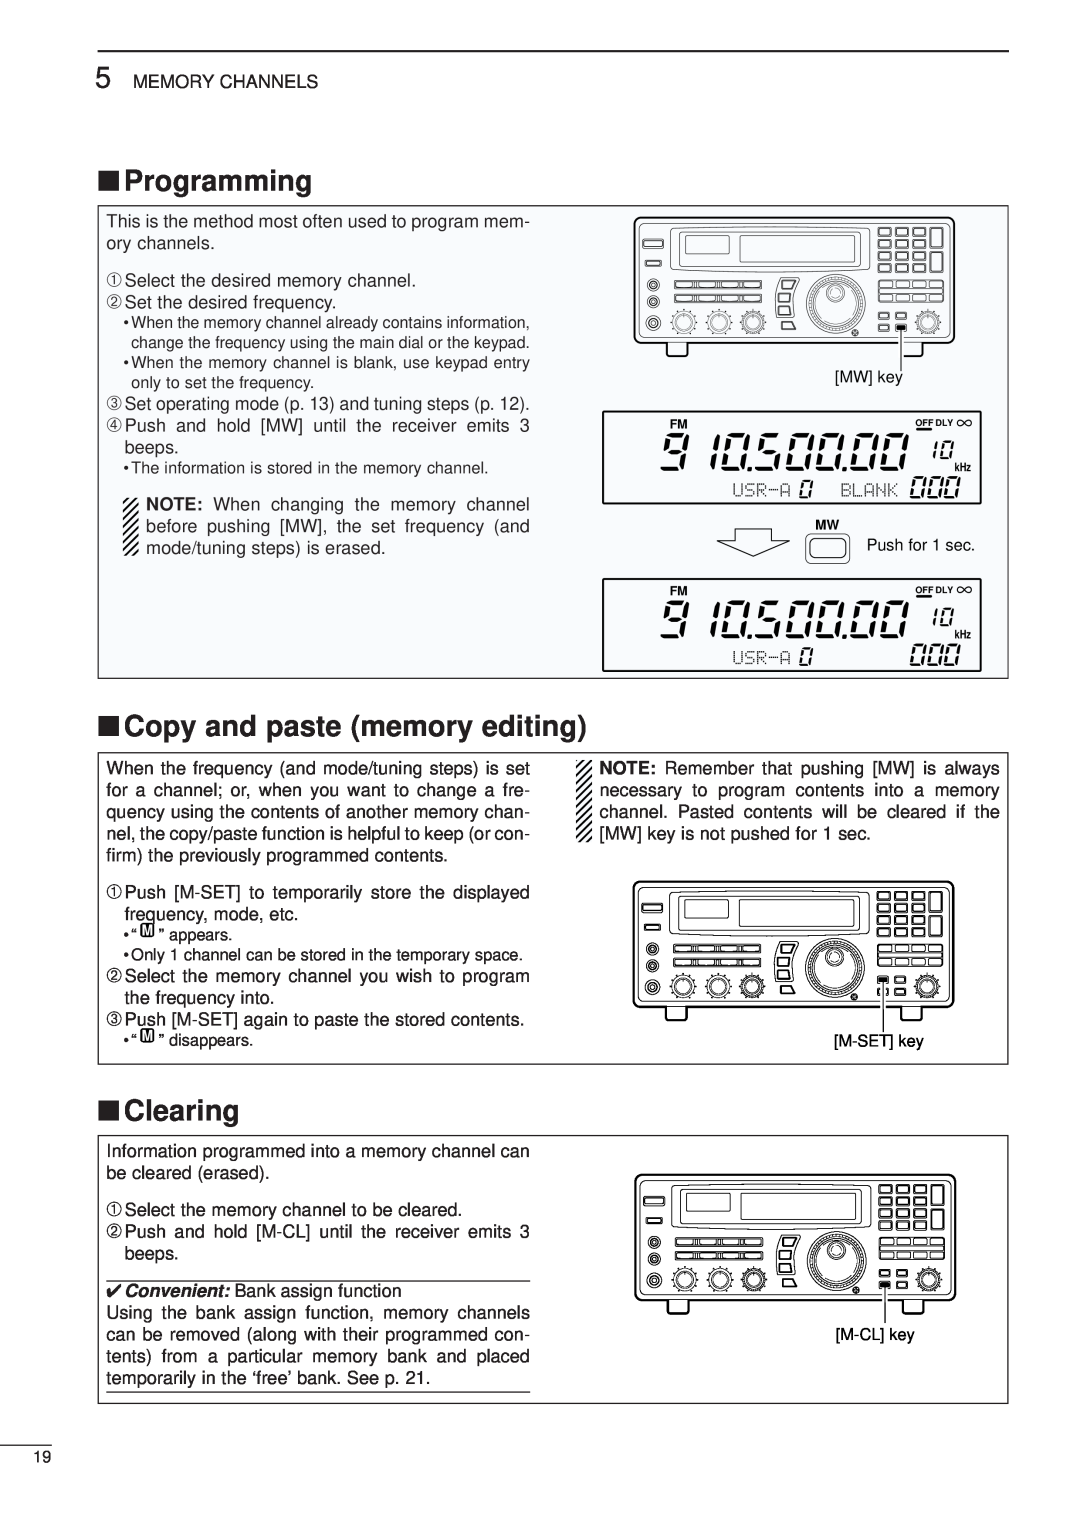 Icom IC-R8500 instruction manual Programming, Copy and paste memory editing, Clearing 